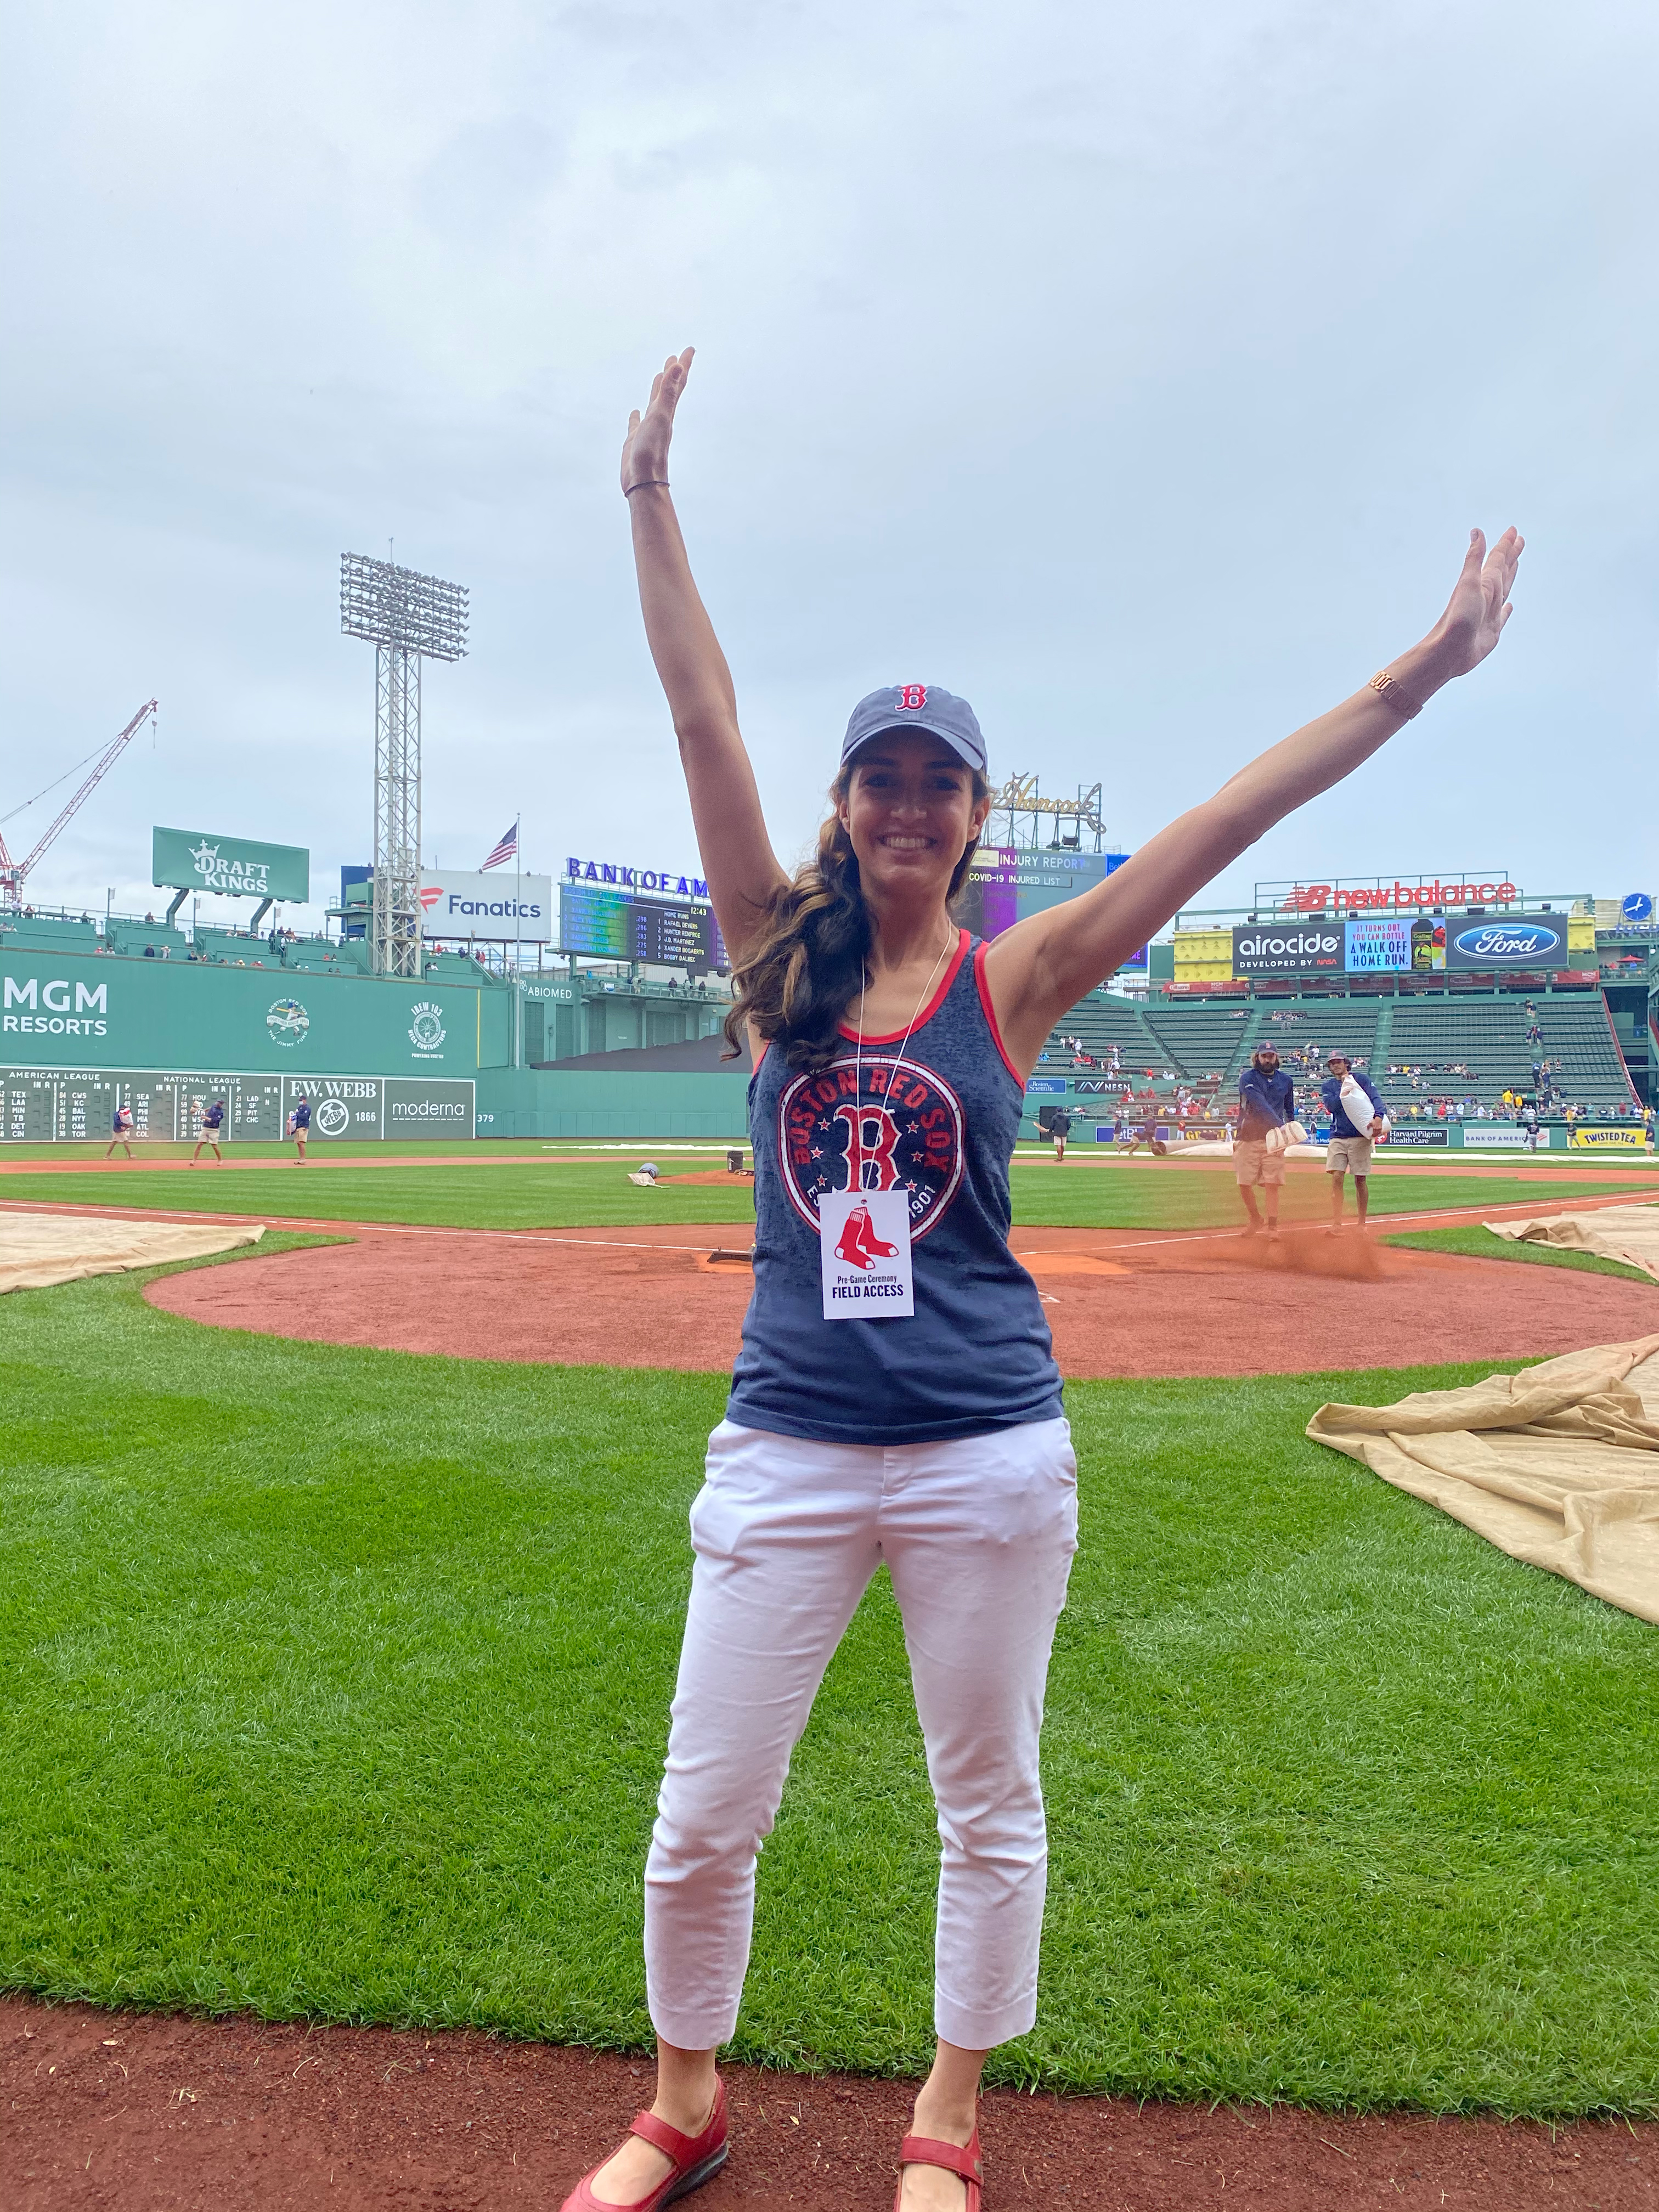 Izbella Pena stands, arms raised joyfully, behind the plate at Fenway Park